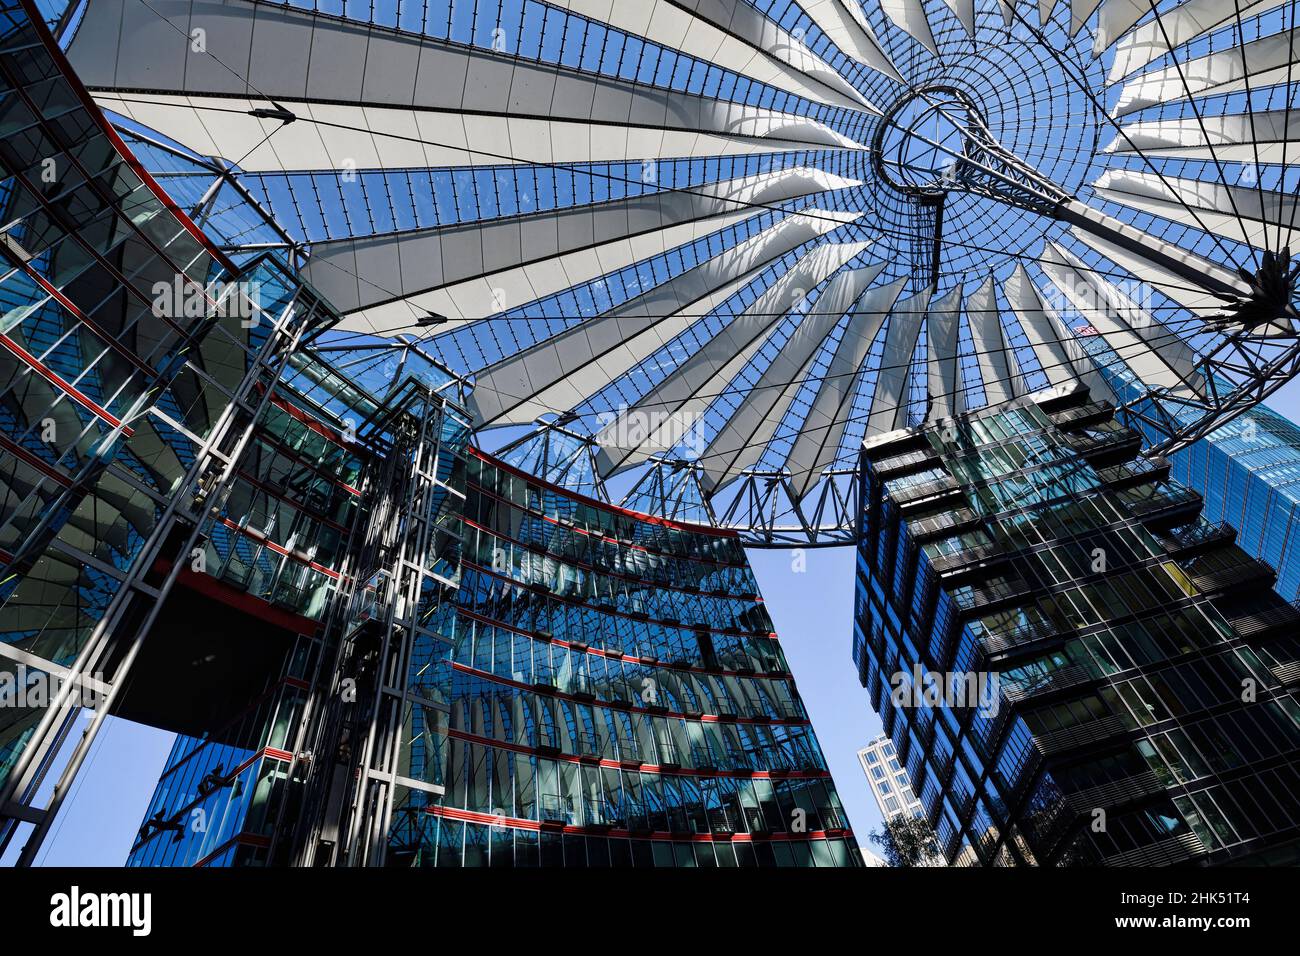 Tented glass roof dome with skyscrapers of the Sony Center, Potsdam Square, Berlin, Germany, Europe Stock Photo